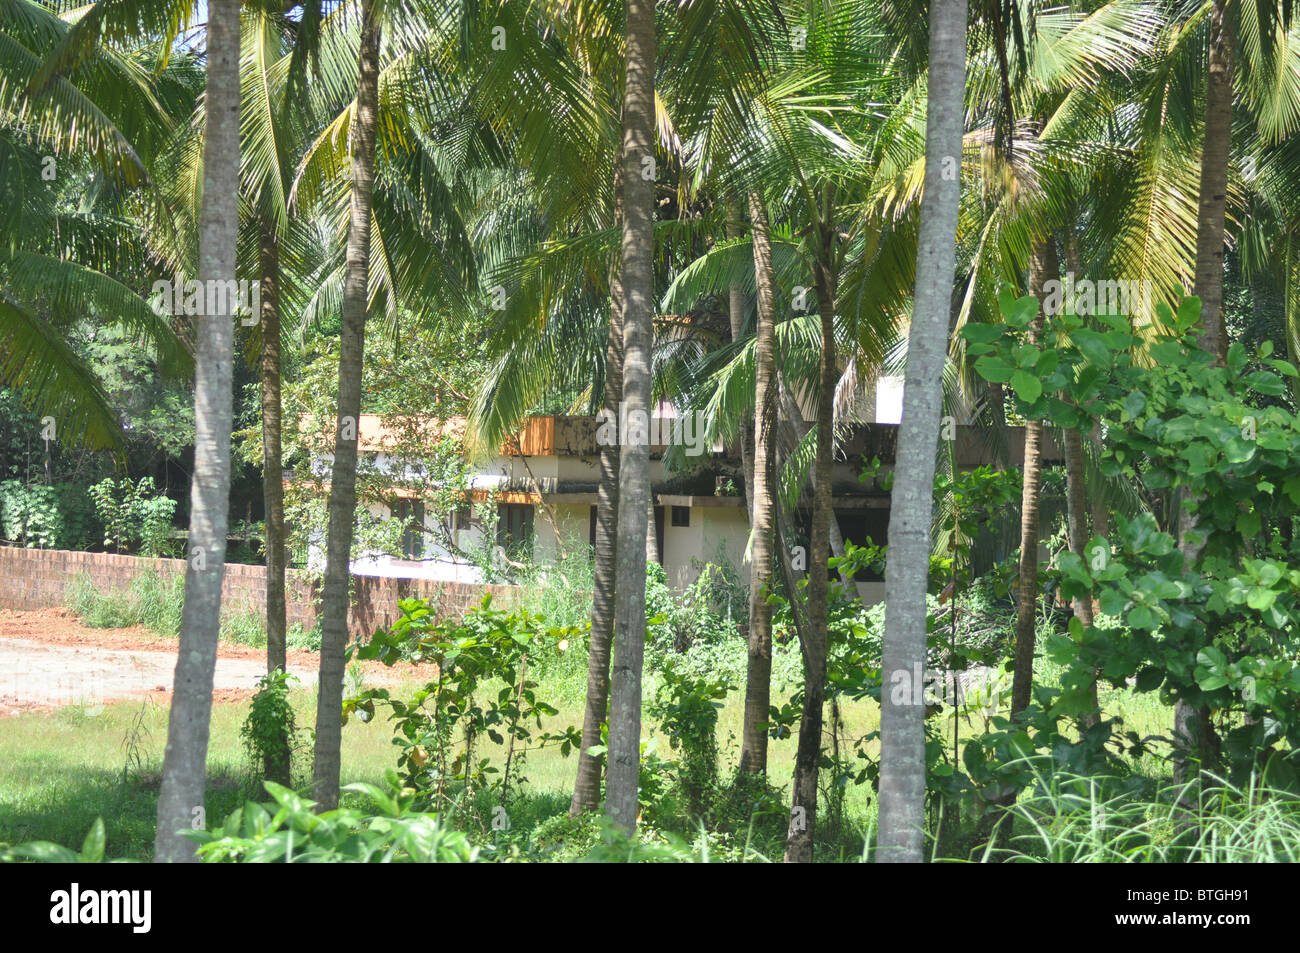 A typical house in a large compound in Kerala, India Stock Photo